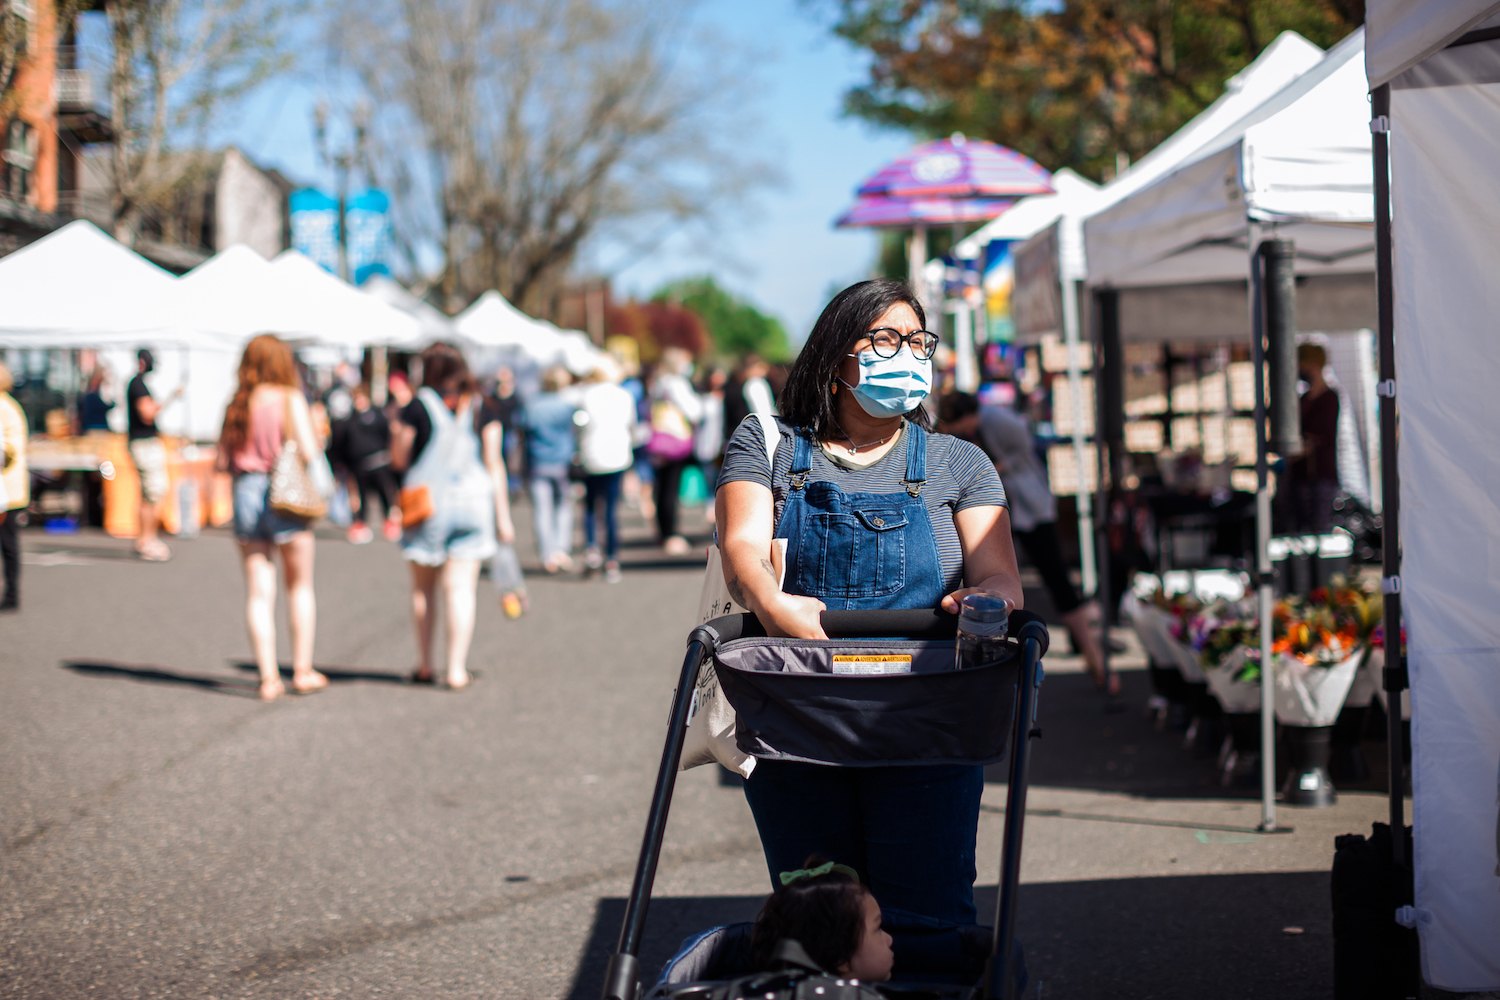 A pregnant mother pushing her little girl who is 1.5 years in a wagon at the local farmers market in Vancouver Washington. She is wearing a face mask while in public outdoors in the covid-19 pandemic.